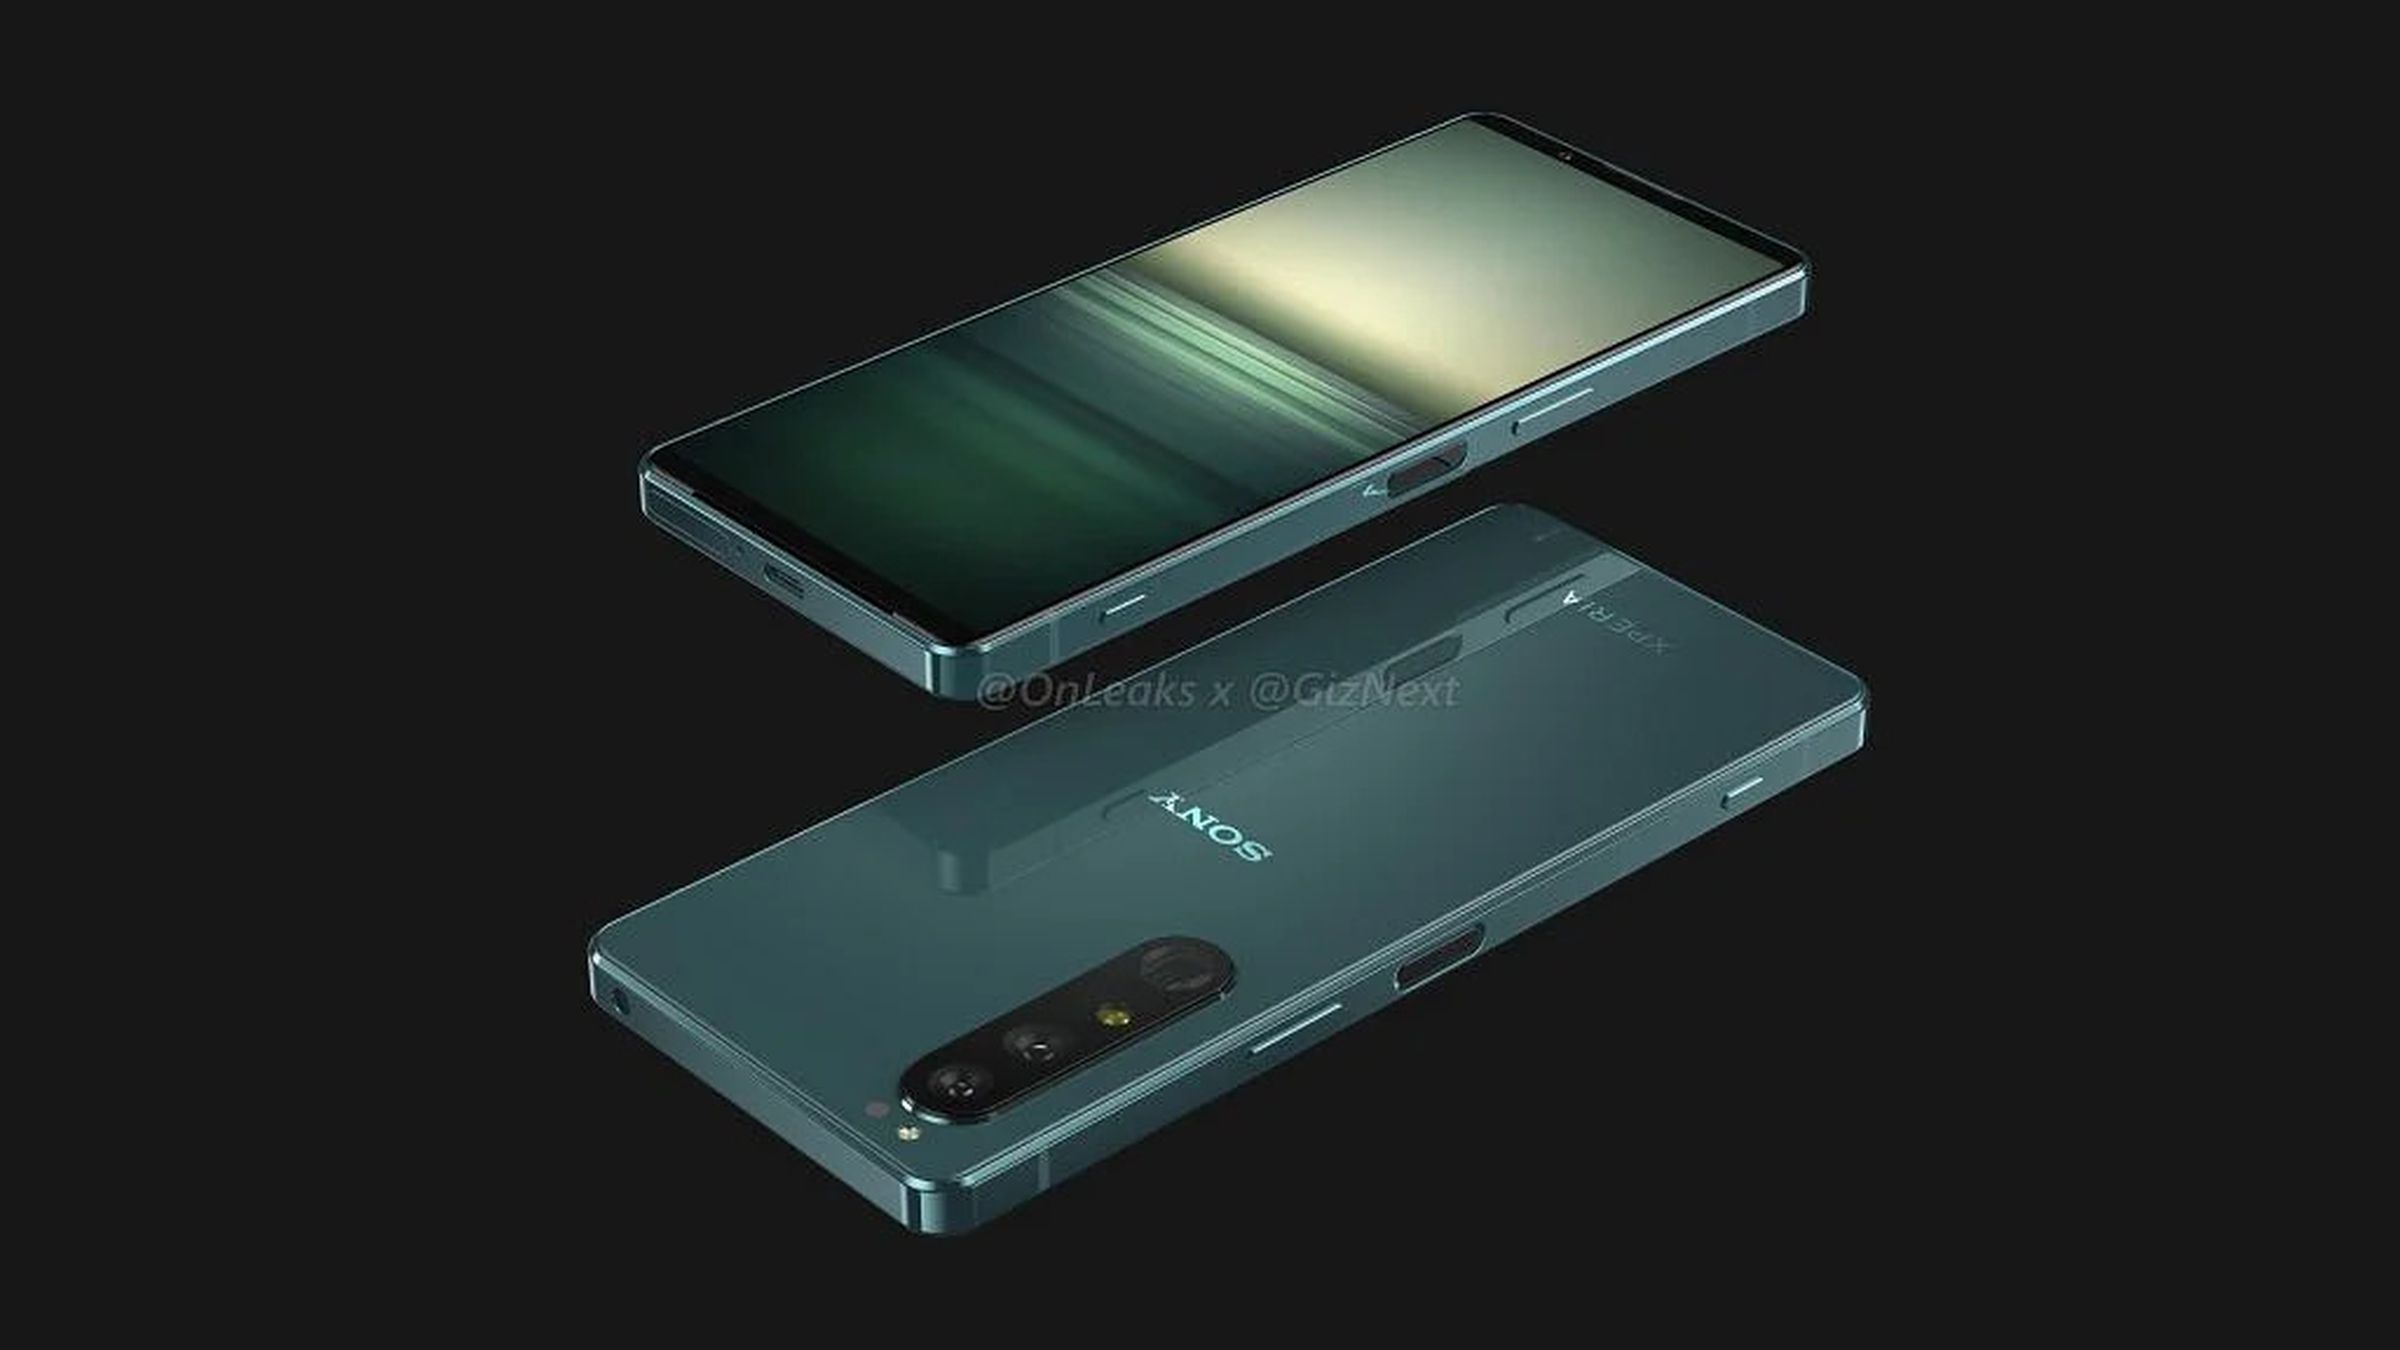 The leaked Xperia 1 IV has a shutter button, fingerprint sensor, power on the side, and SIM tray on the bottom. There are three cameras on the back, one seeming to be telescopic. And there’s still a headphone jack on the top.